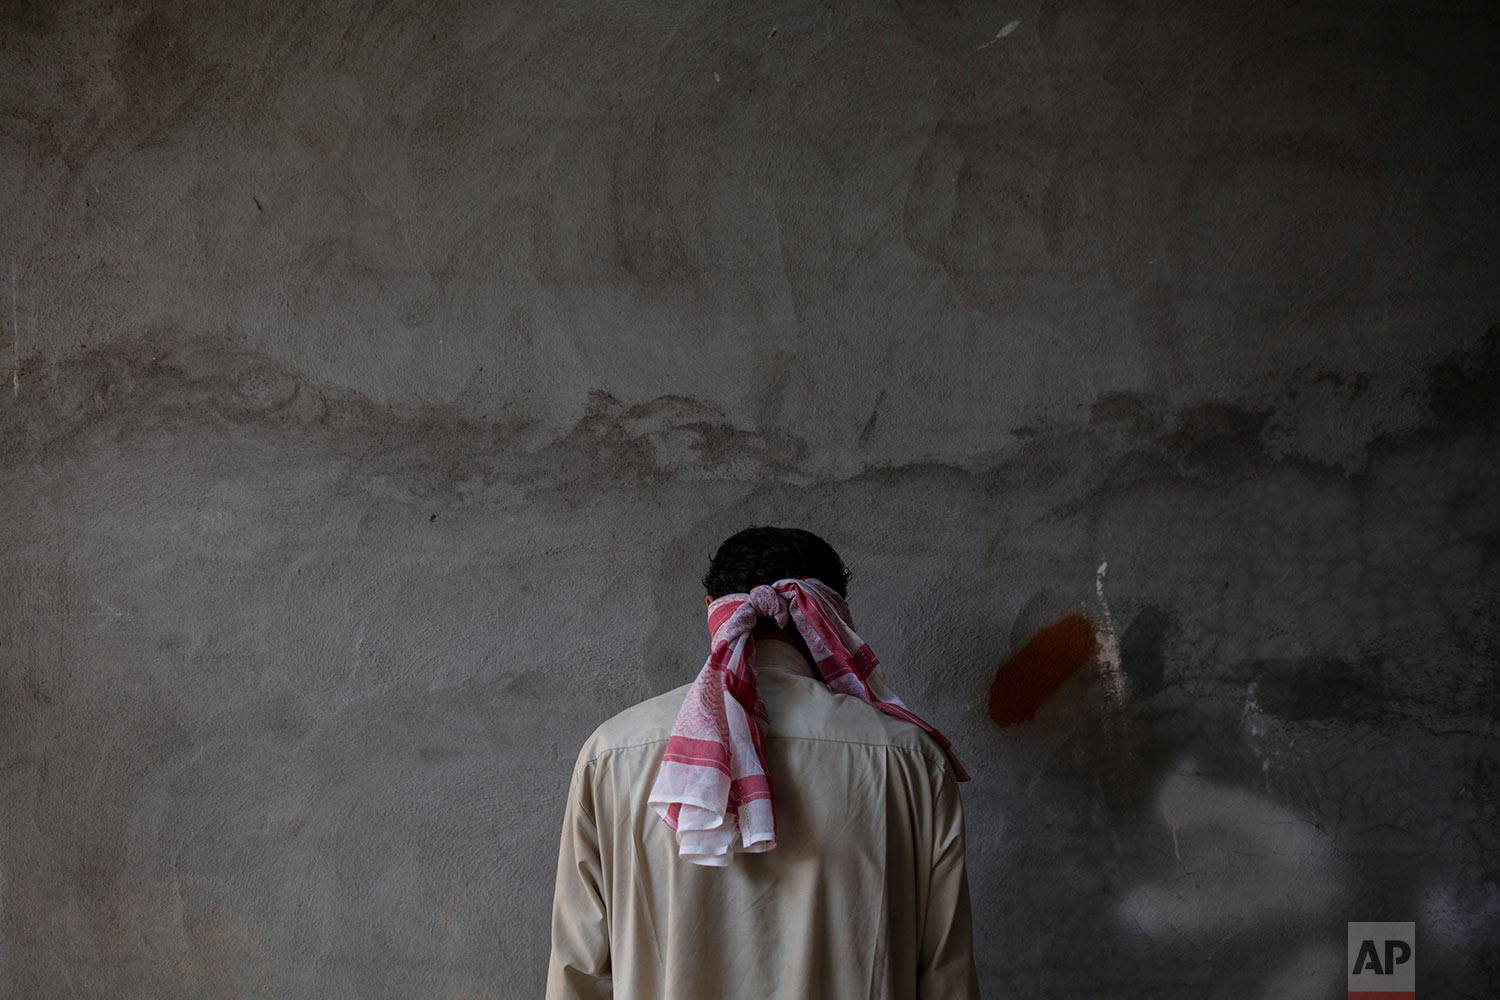  A blindfolded Islamic State suspect stands against a wall at a Kurdish screening center in Dibis, Tuesday, Oct. 3, 2017. Displaced people from Hawija are brought to the center where men are being separated from the women and children and are investigated for involvement in the Islamic State group. (AP Photo/Bram Janssen) 